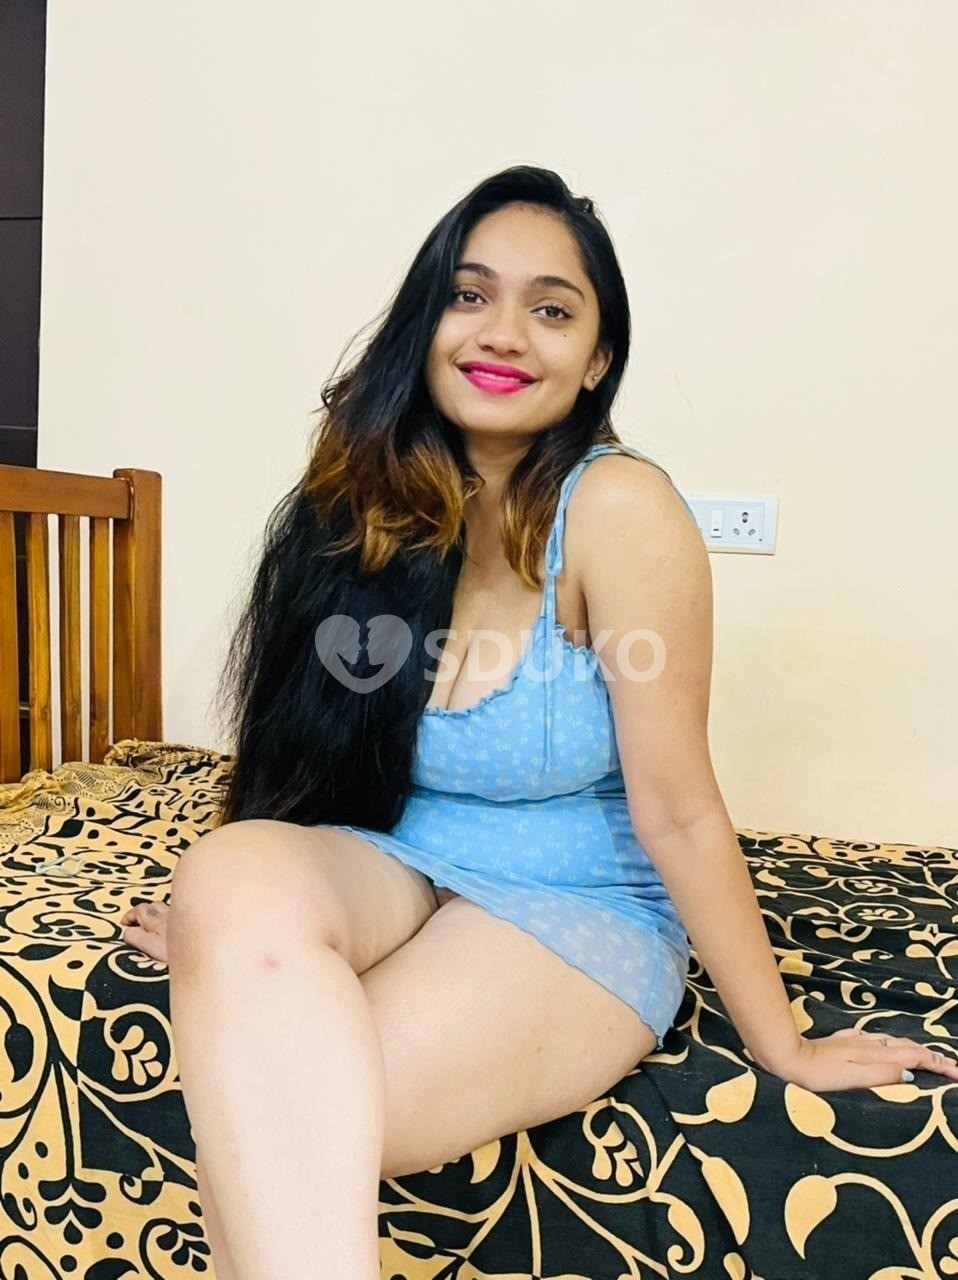 BHARUCH 💥 ESCORT INDEPENDENT-CALL GIRLS AVAILABLE WITH PLACE CHEAP RATE. .,,,,,,,₹+₹+₹!"